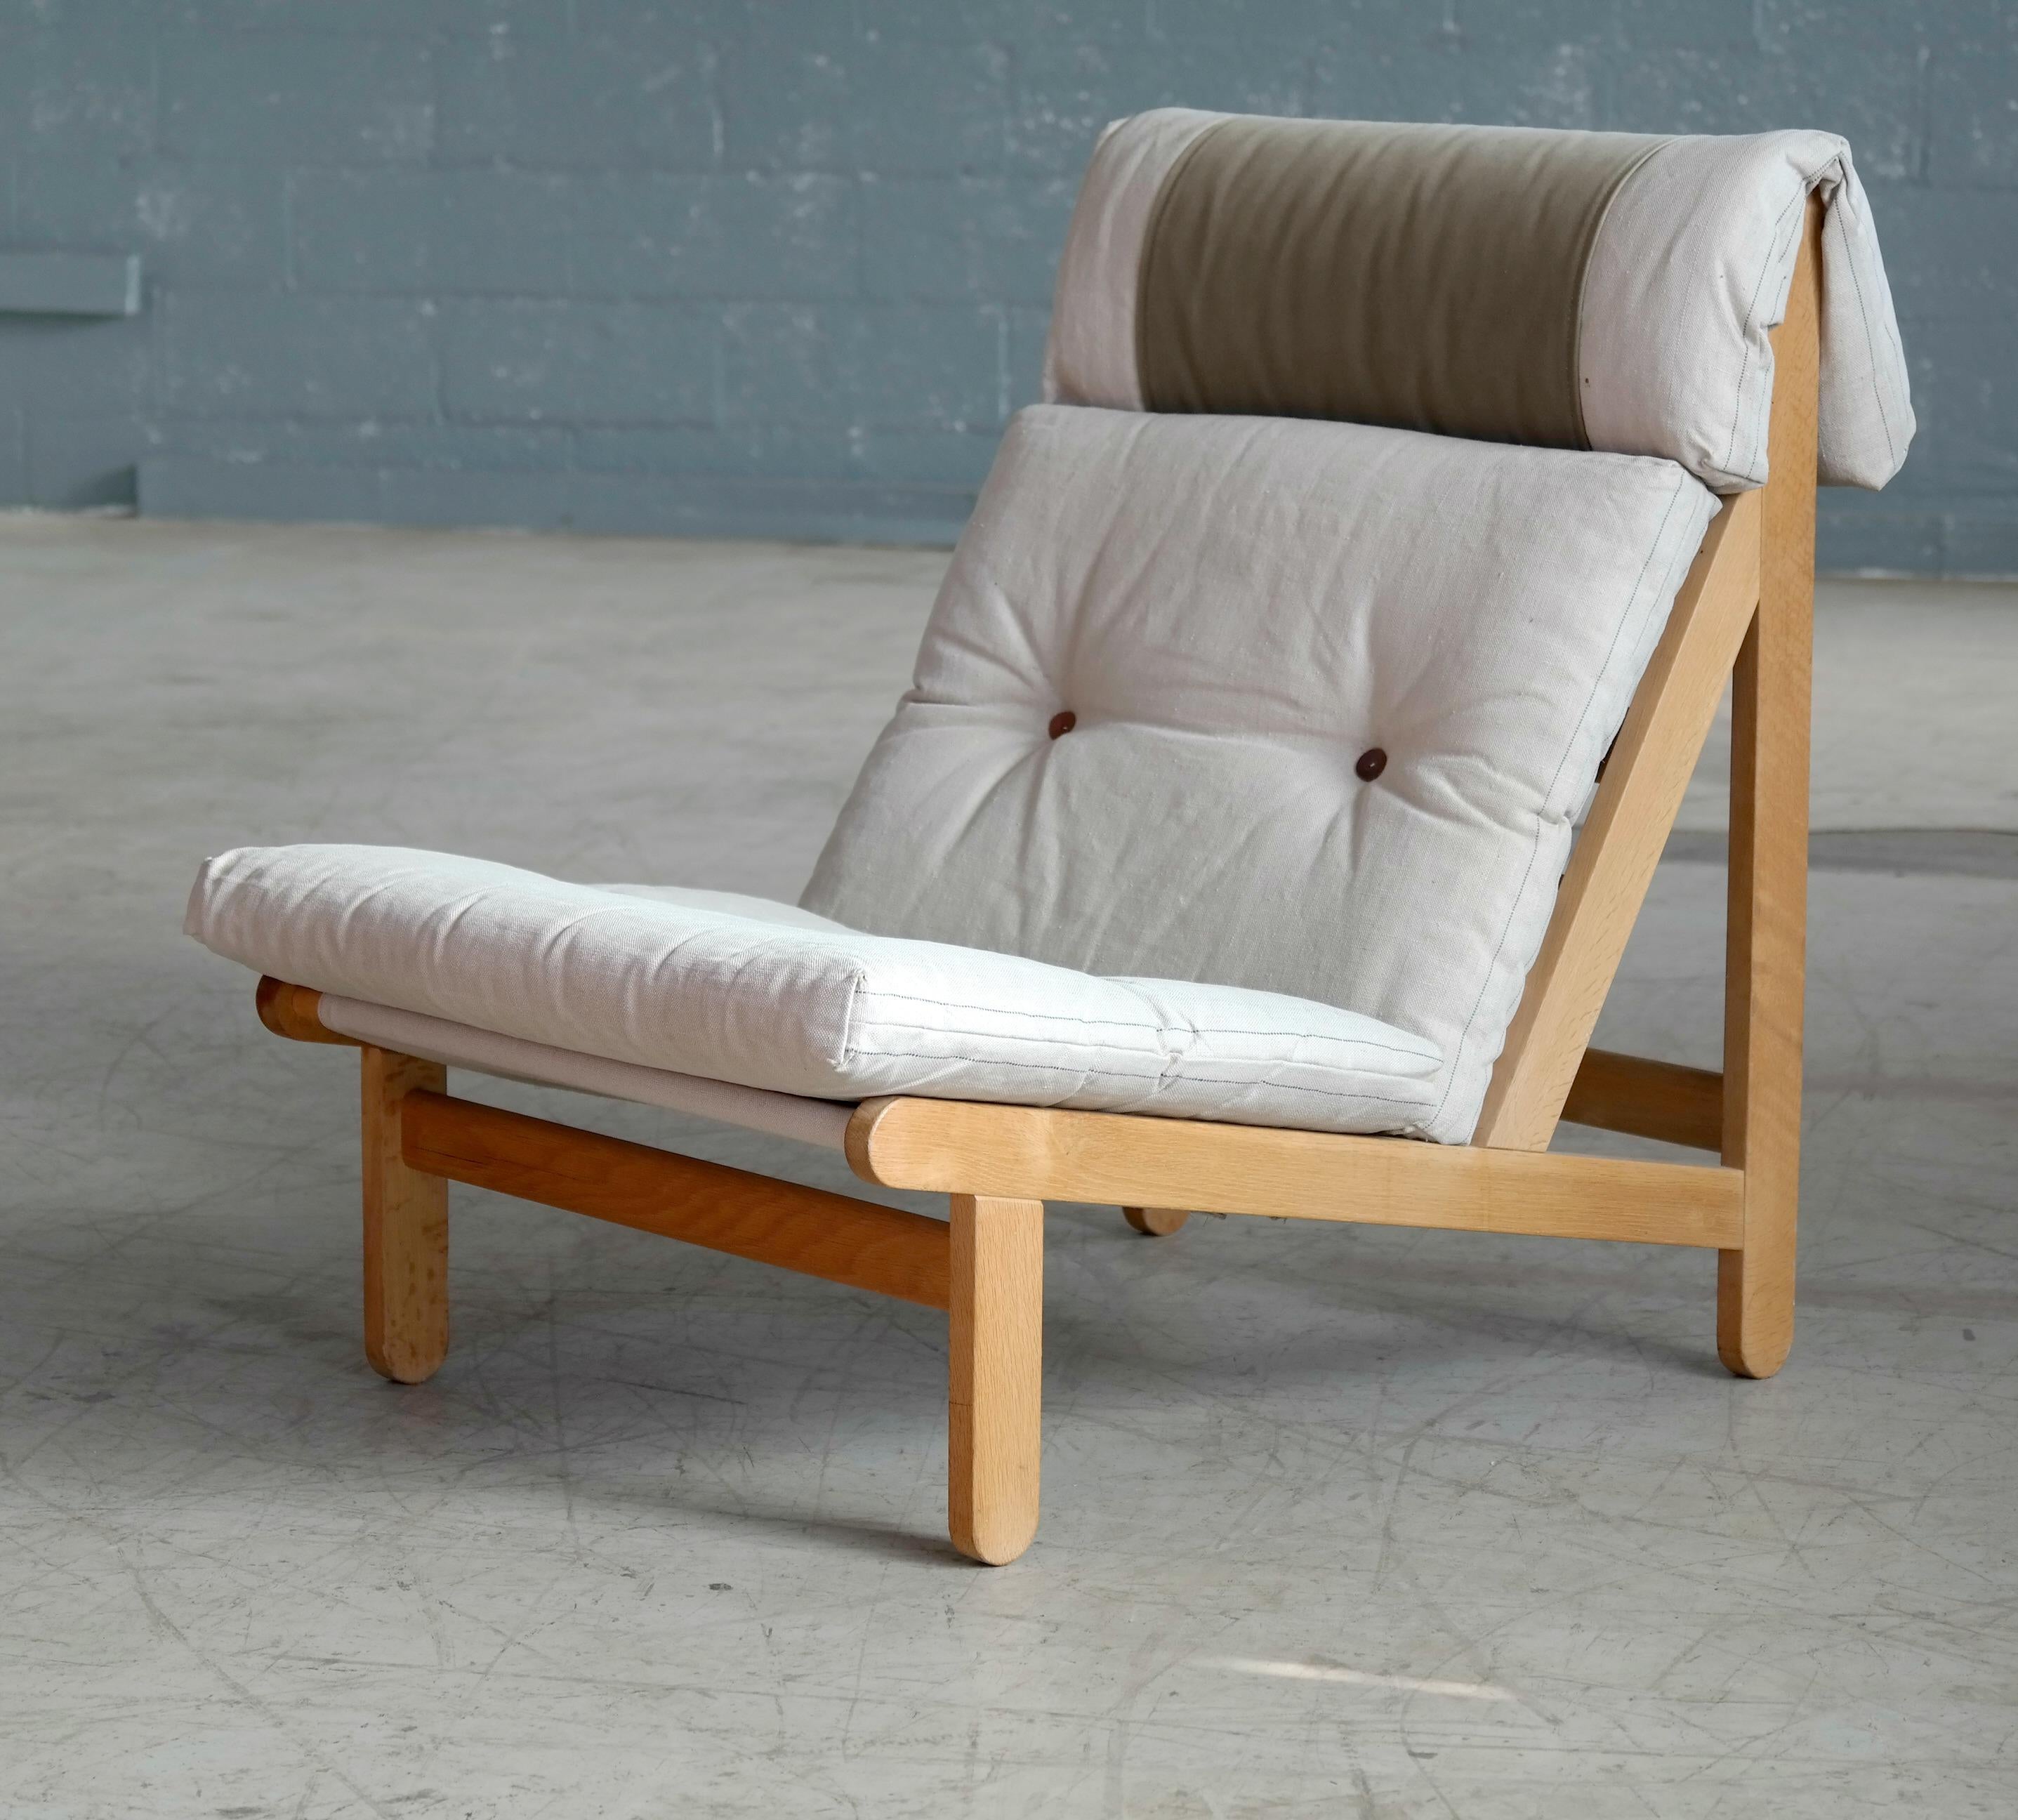 Rare and very sought after easy lounge chair designed by Bernt Petersen for Schiang Furniture of Denmark in 1966. Oak frame with loose cushions in seat and back upholstered with an off-white colored heavy canvas fitted with leather buttons. Neck